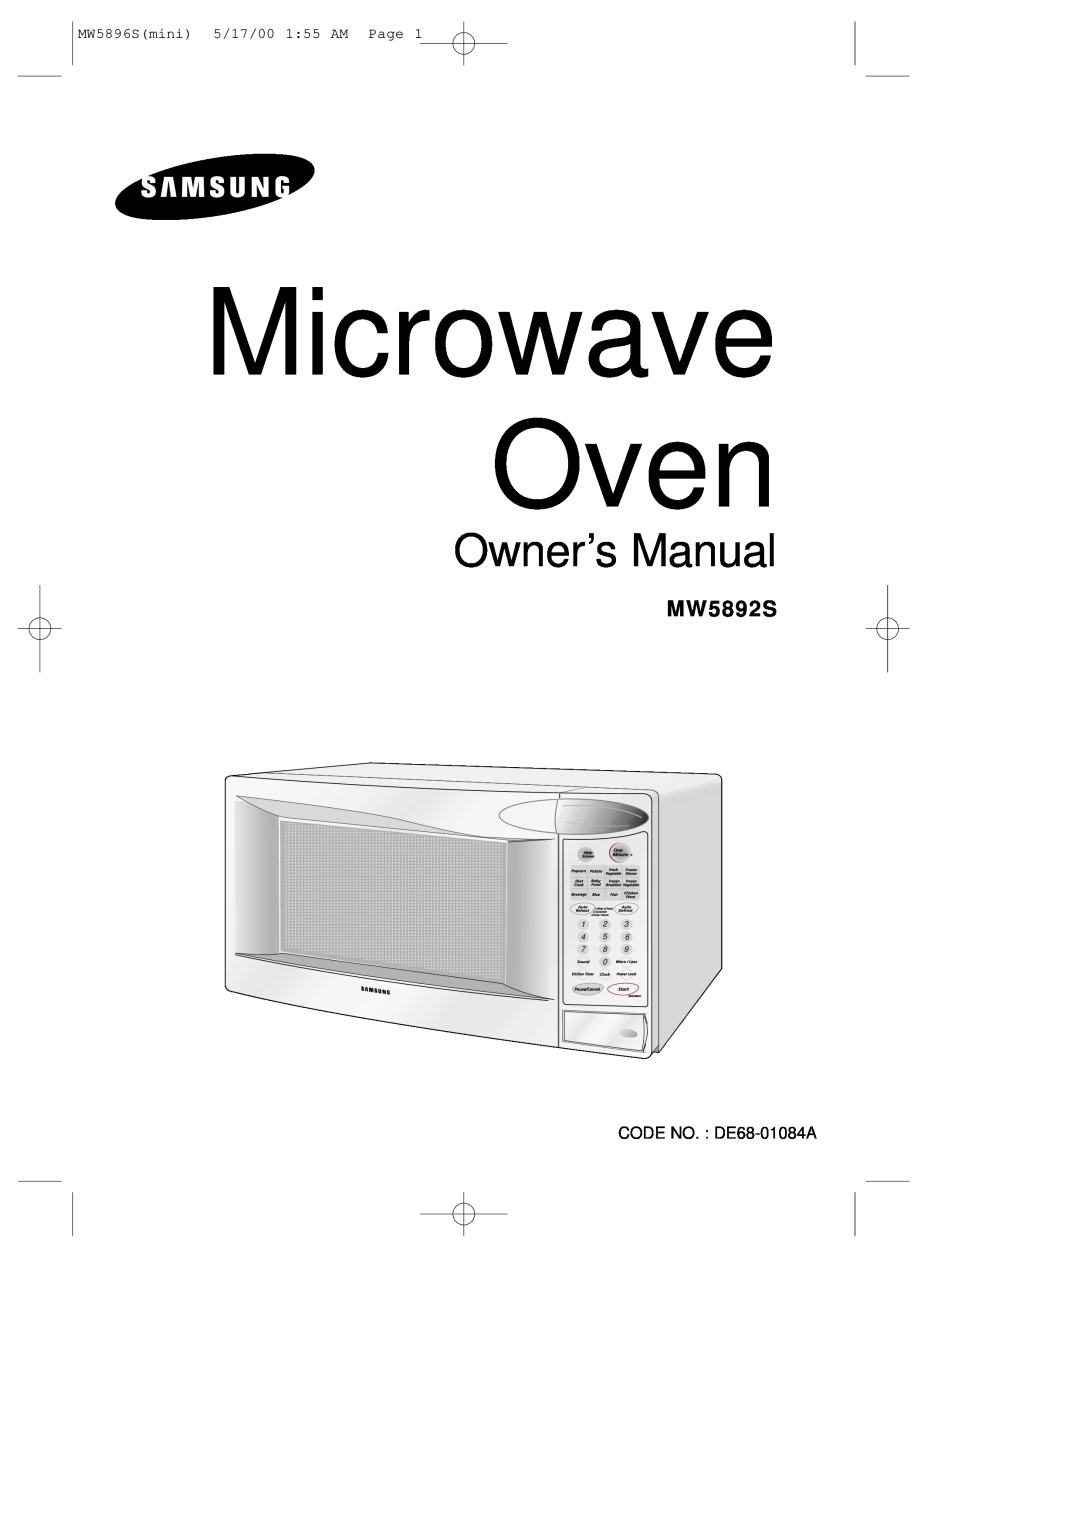 Samsung MW5892S owner manual Microwave Oven, MW5896Smini 5/17/00 1 55 AM Page 